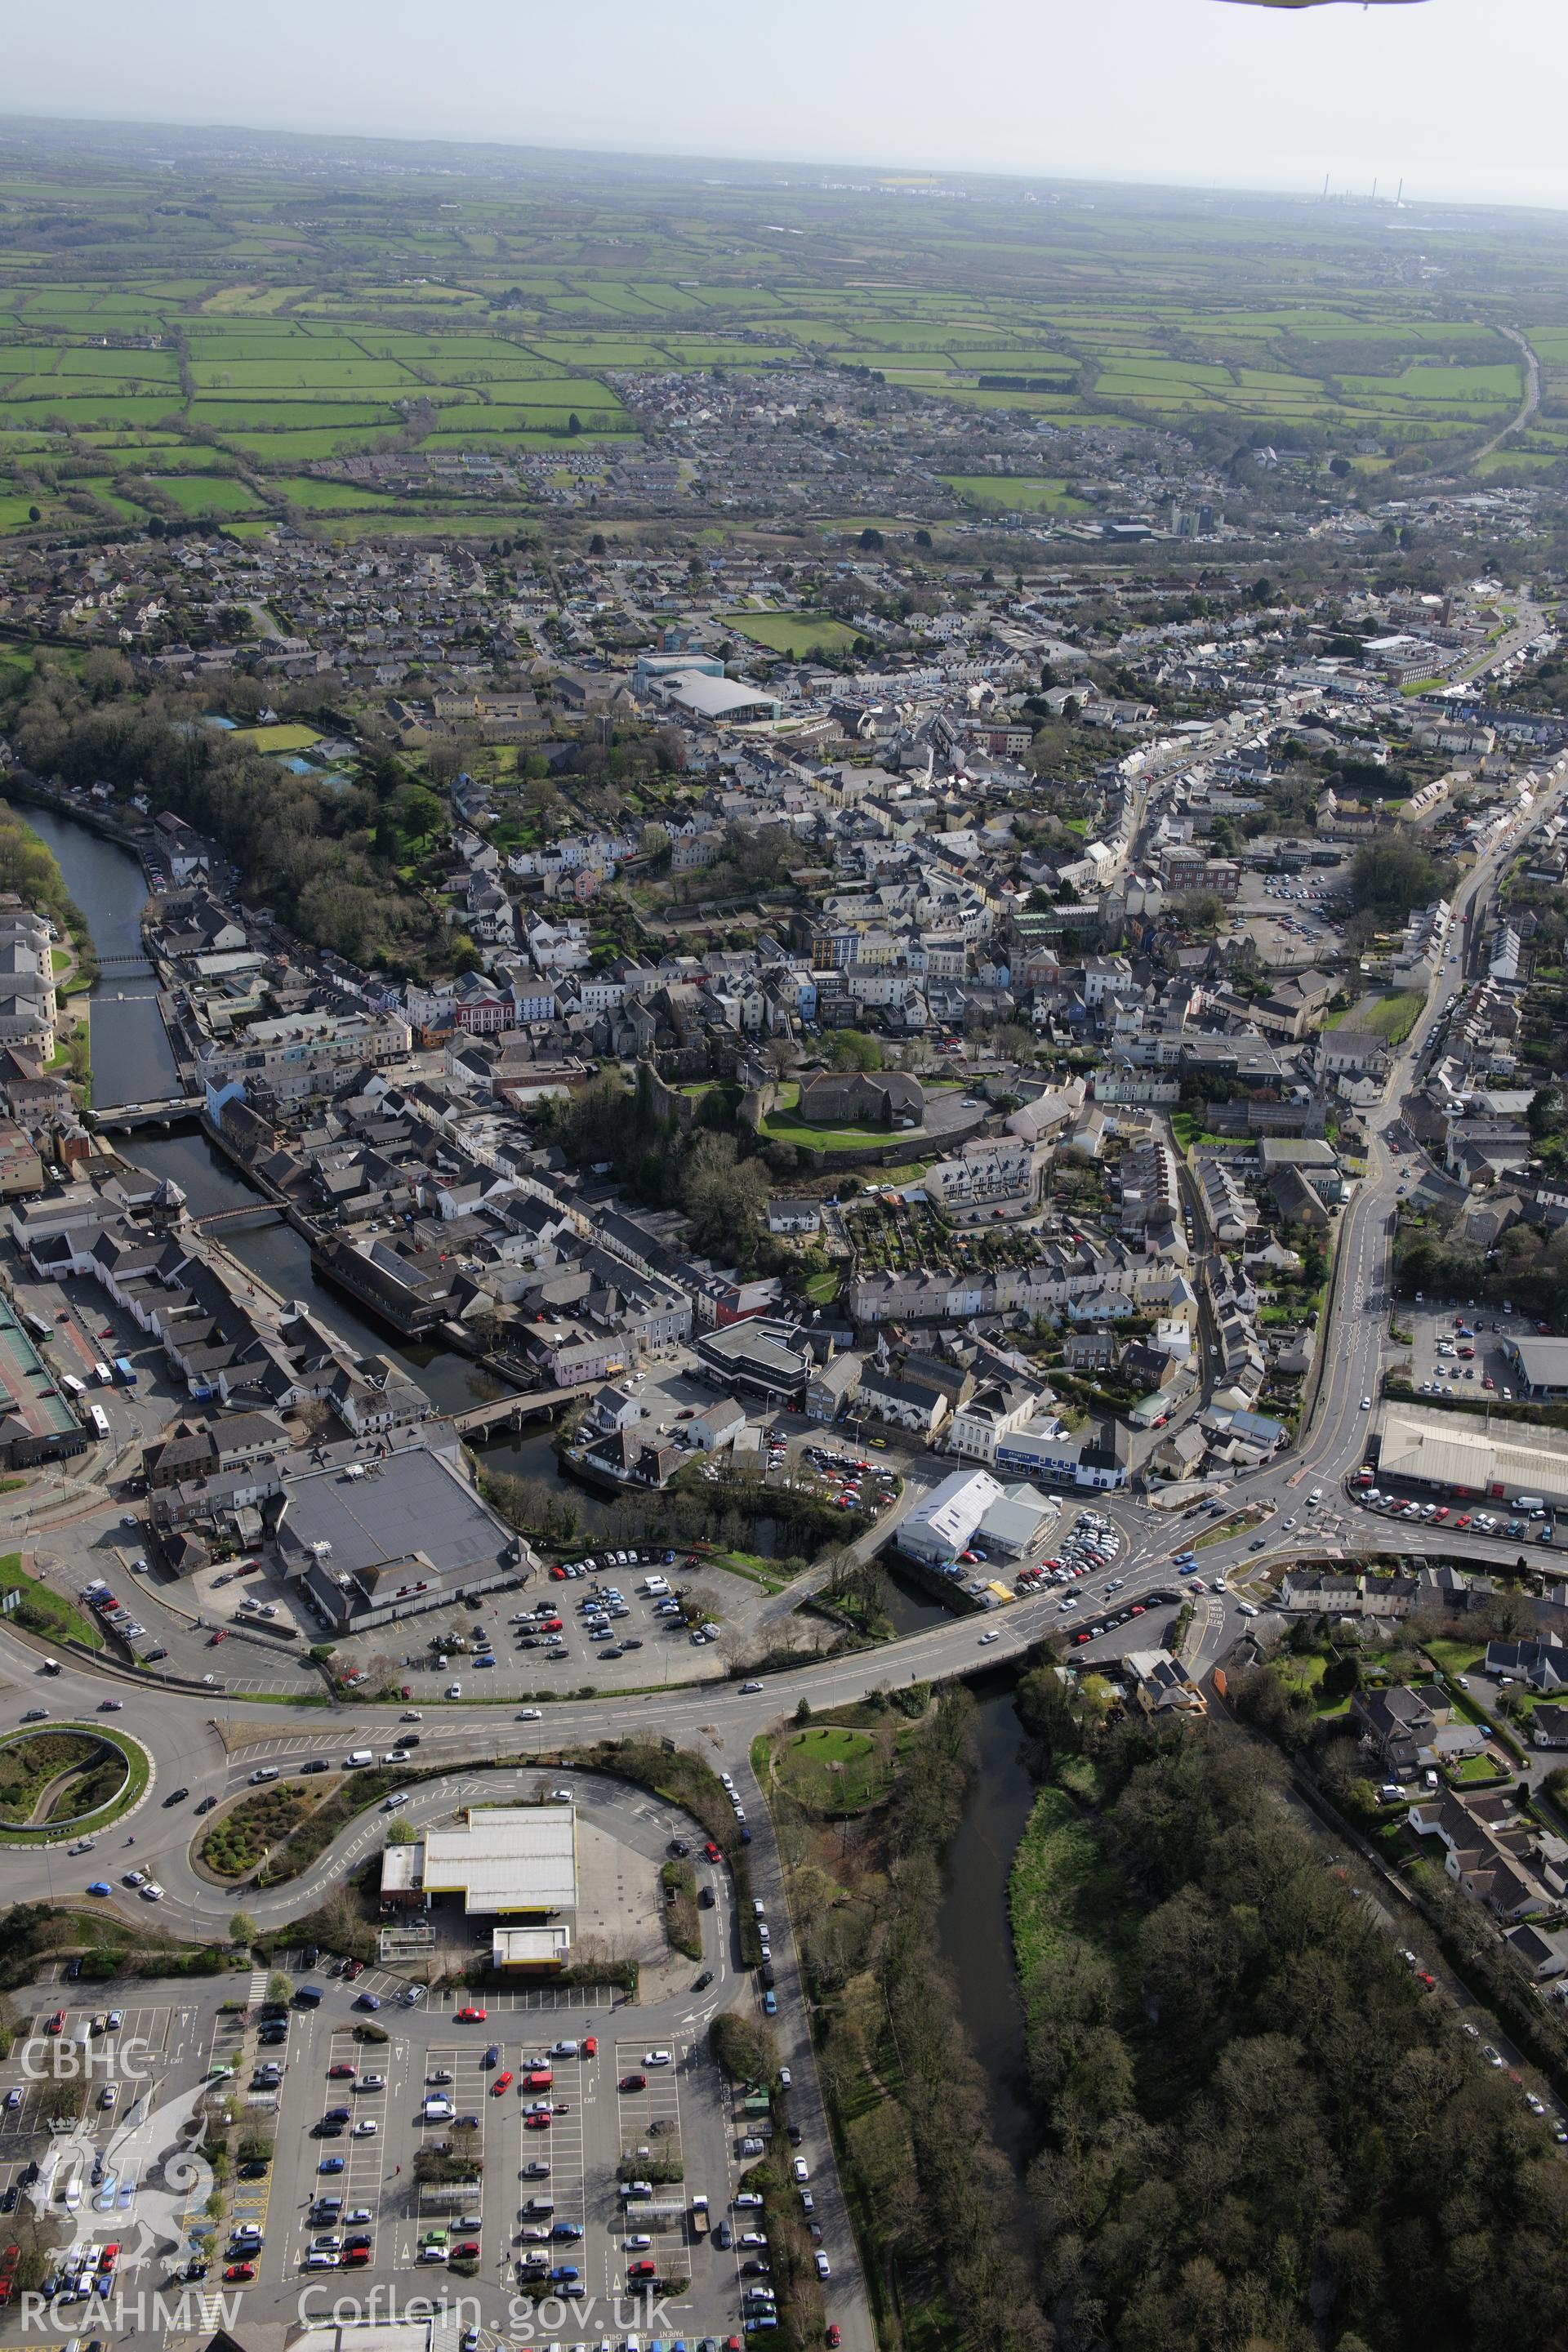 Haverford West, Haverfordwest Castle, (former) Gaol, Old Bridge and New Bridge. Oblique aerial photograph taken during the Royal Commission's programme of archaeological aerial reconnaissance by Toby Driver on 15th April 2015